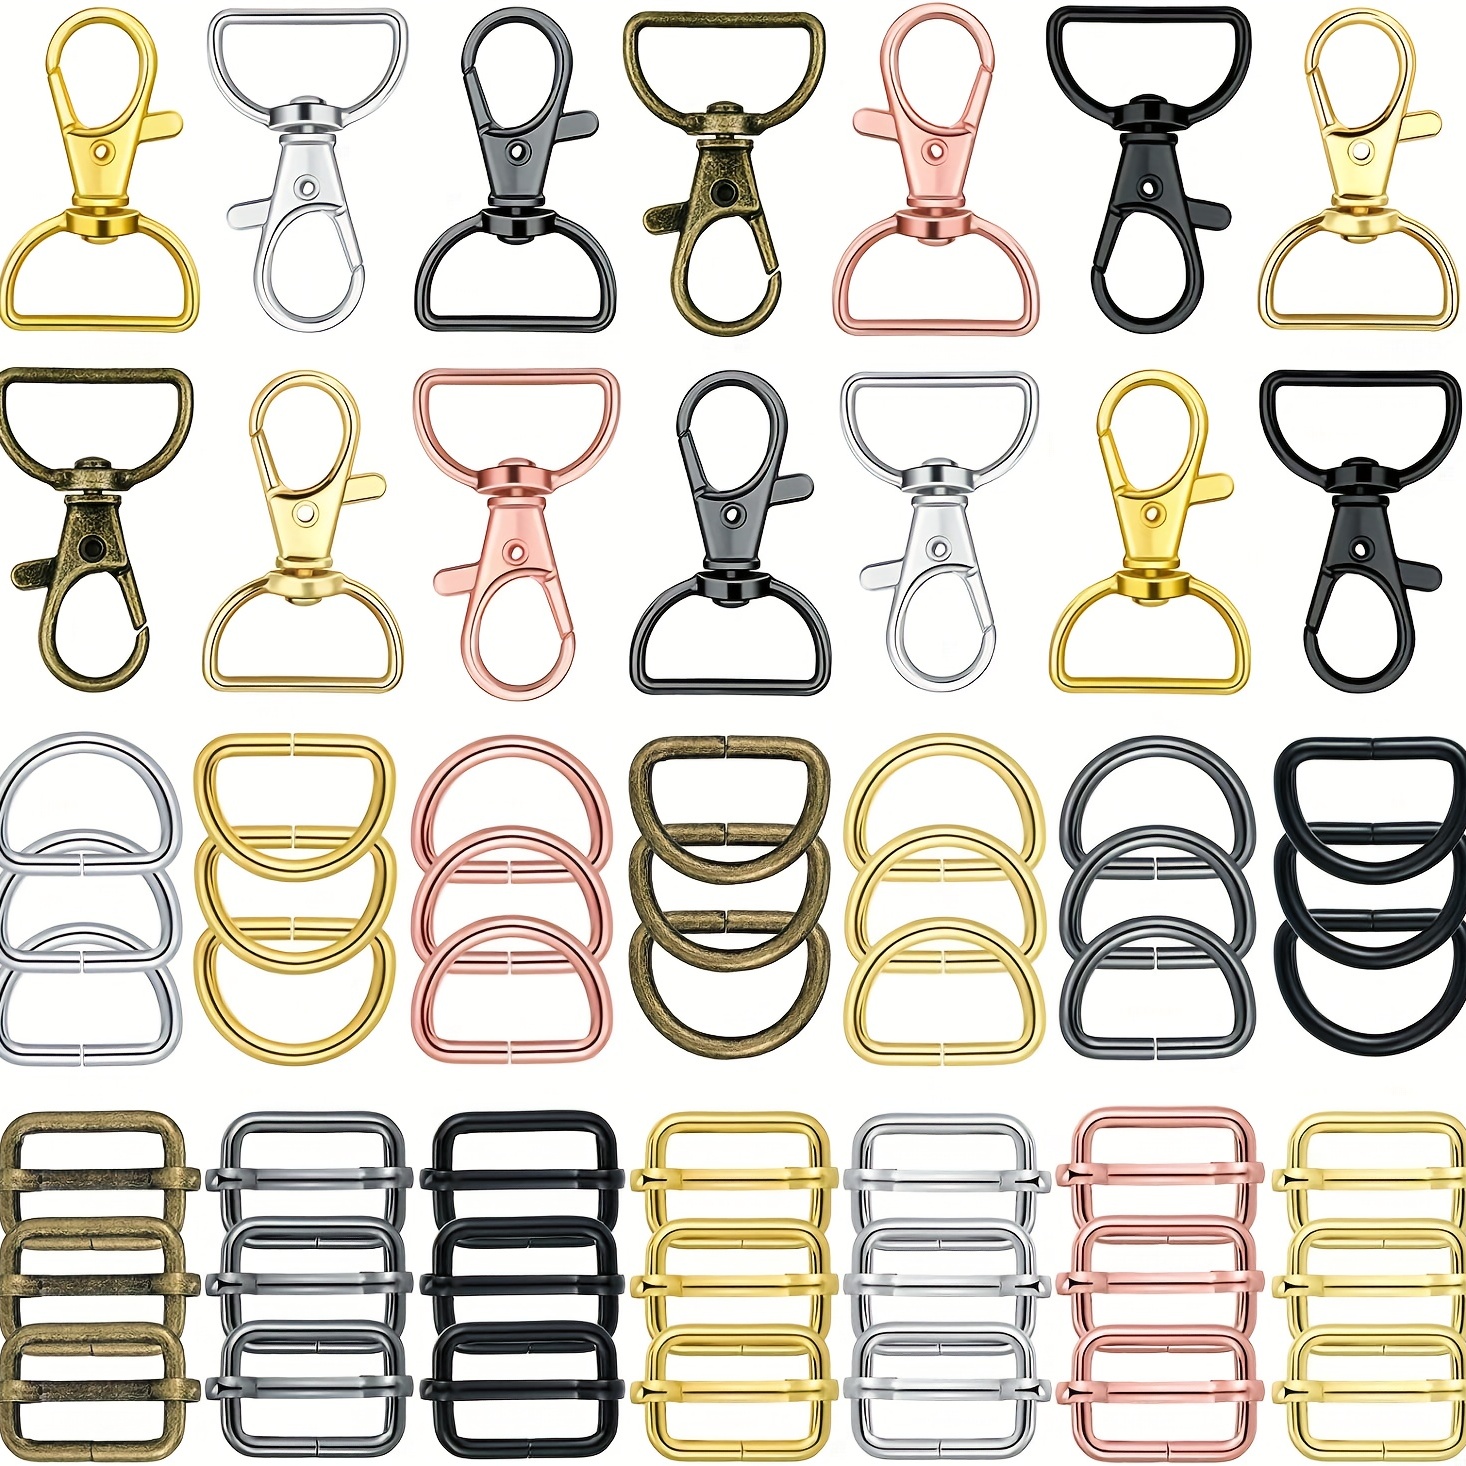 

56pcs Zinc Alloy Rotating Lobster Clasp D-type Keychain Luggage Hardware Accessories, Color Keyring Sliding Buckle, Keychain Making Buckle Luggage Accessories Small Business Supplies